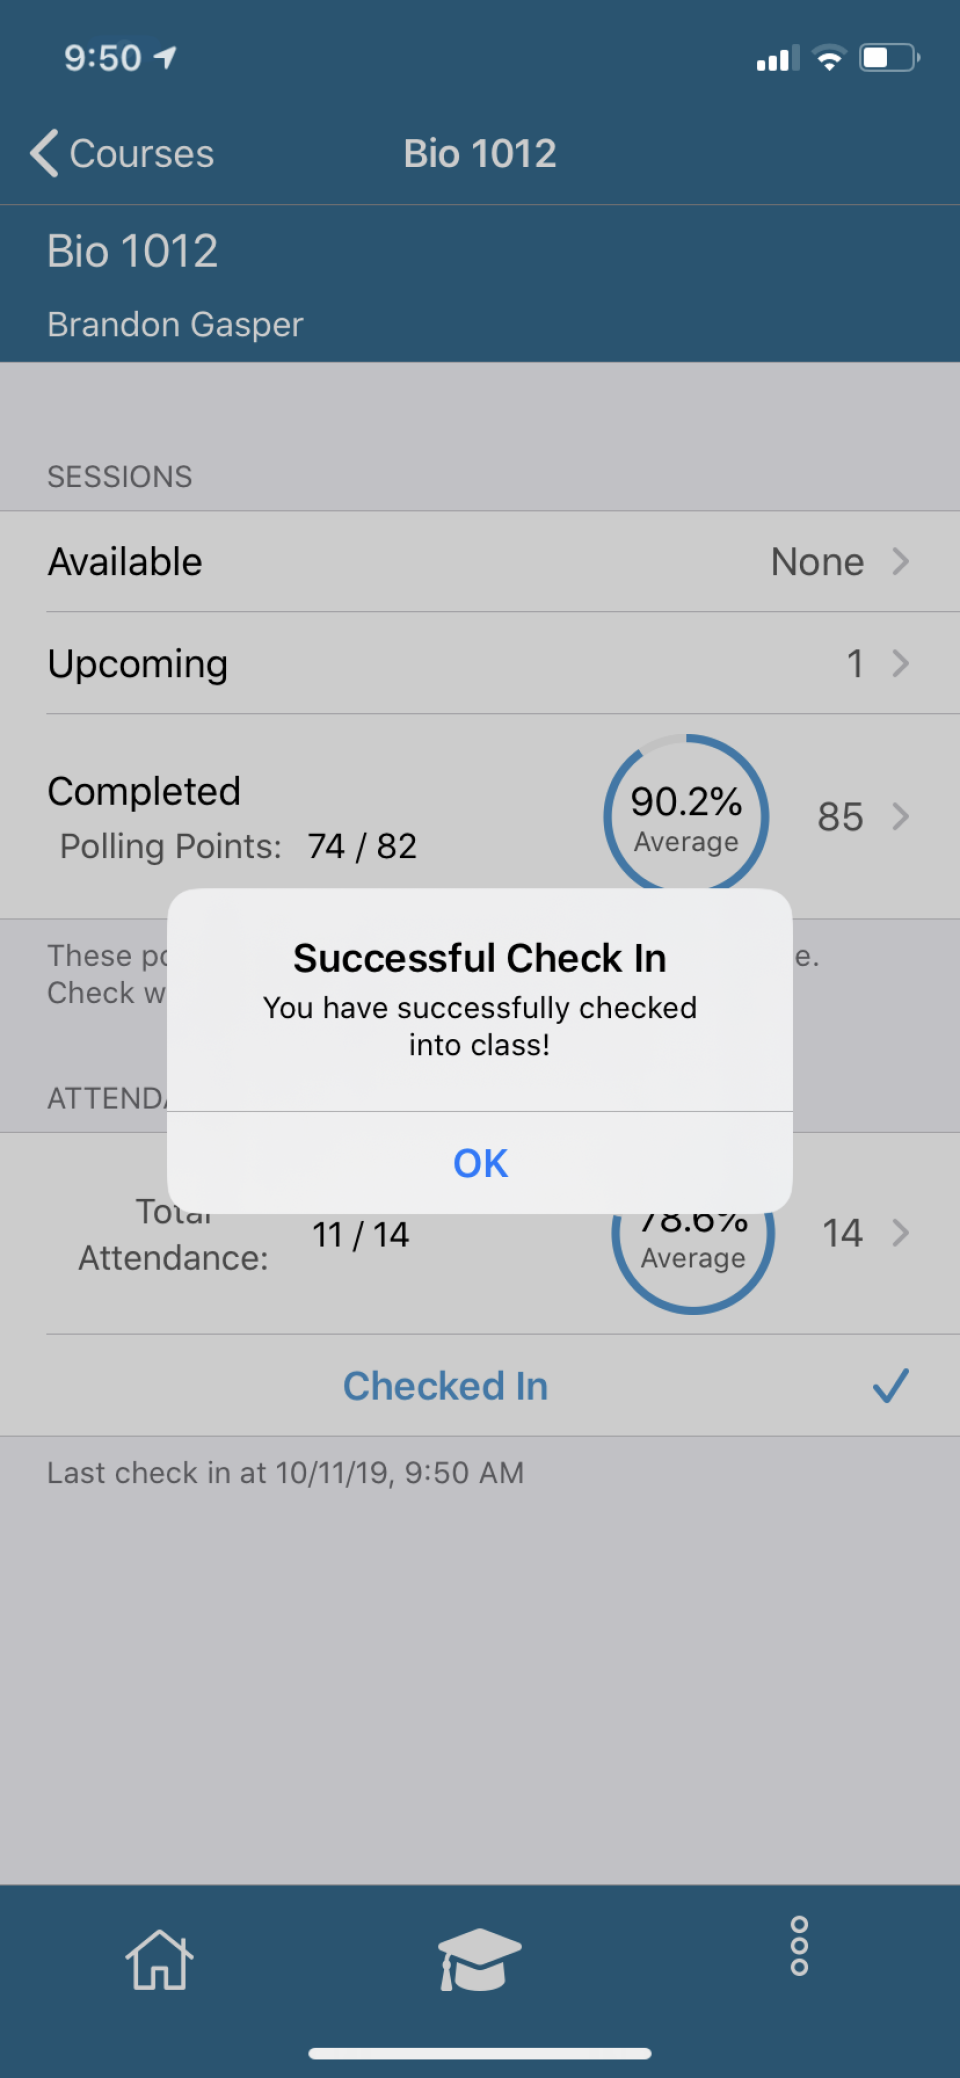 Turning mobile check-in